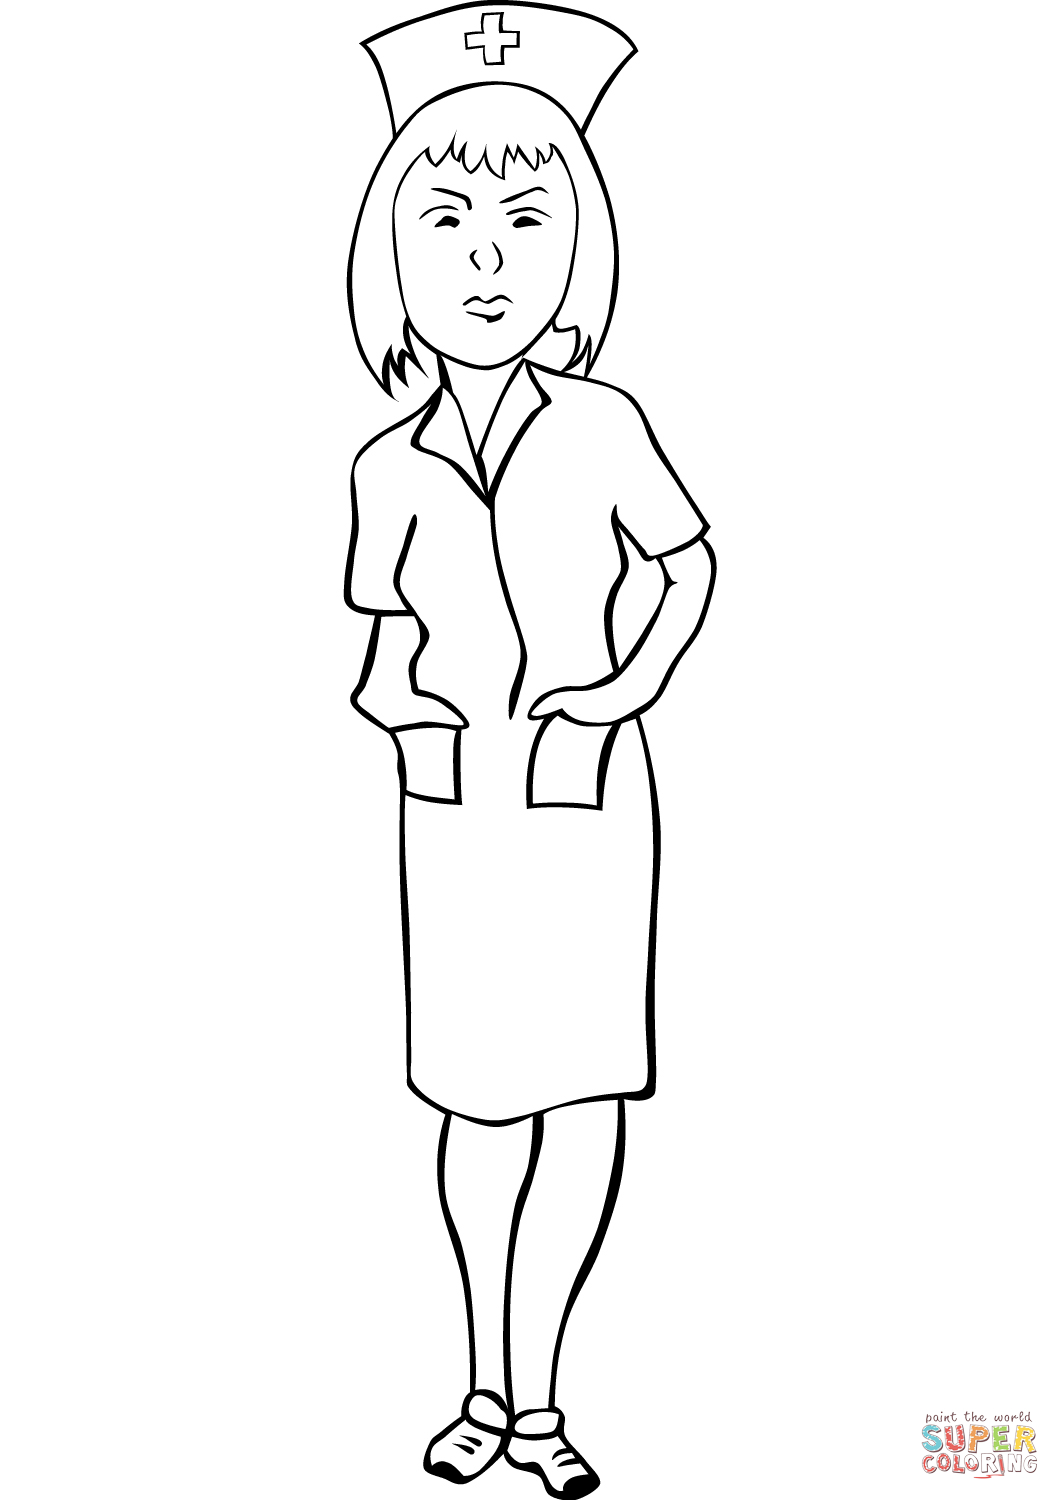 Nursing Coloring Pages Nurse Coloring Page Free Printable Coloring Pages